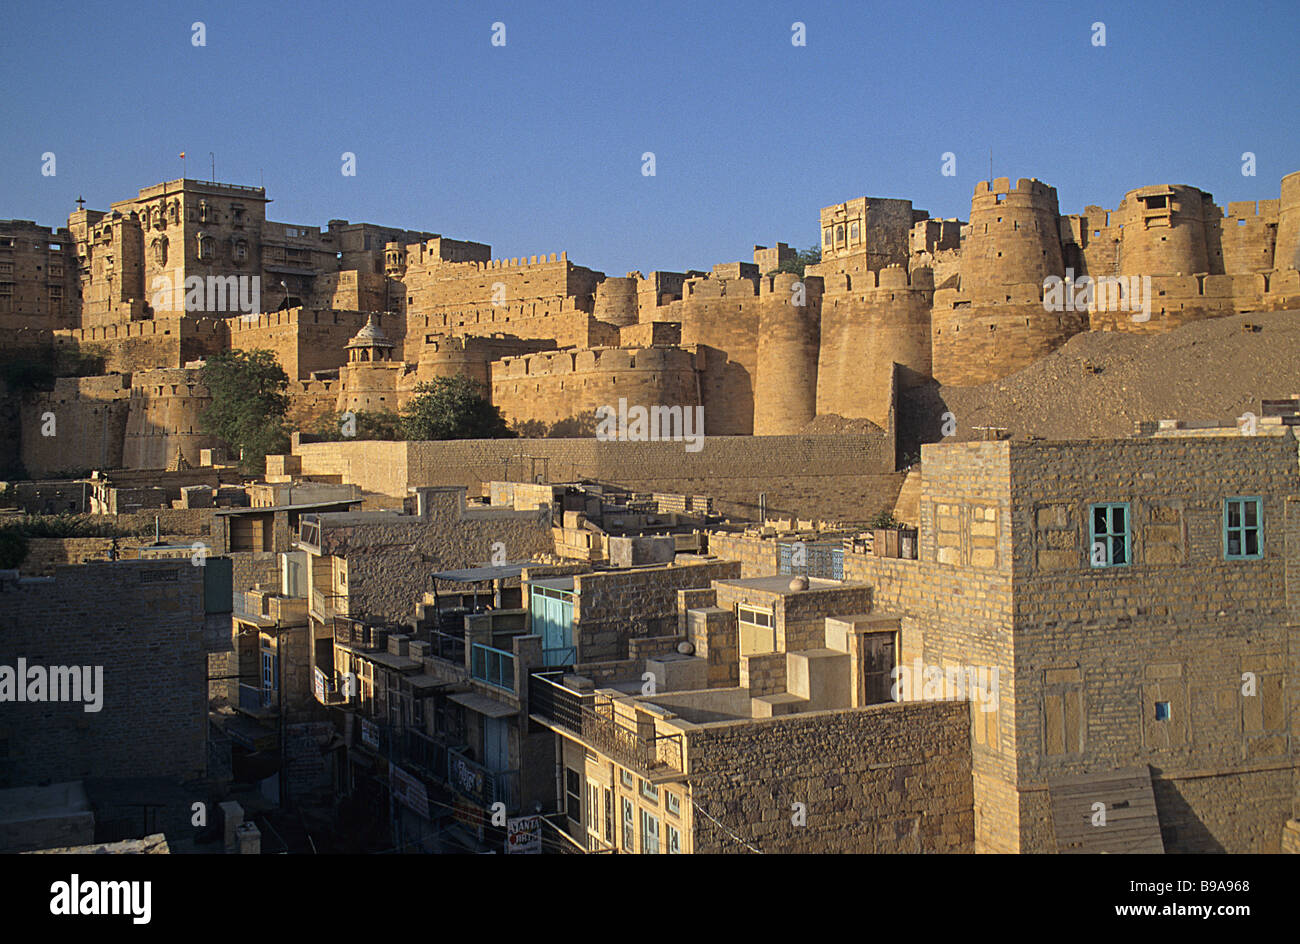 Jaisalmer, Rajasthan, India. Exterior of Fort from the west, with the town in the foreground. Stock Photo